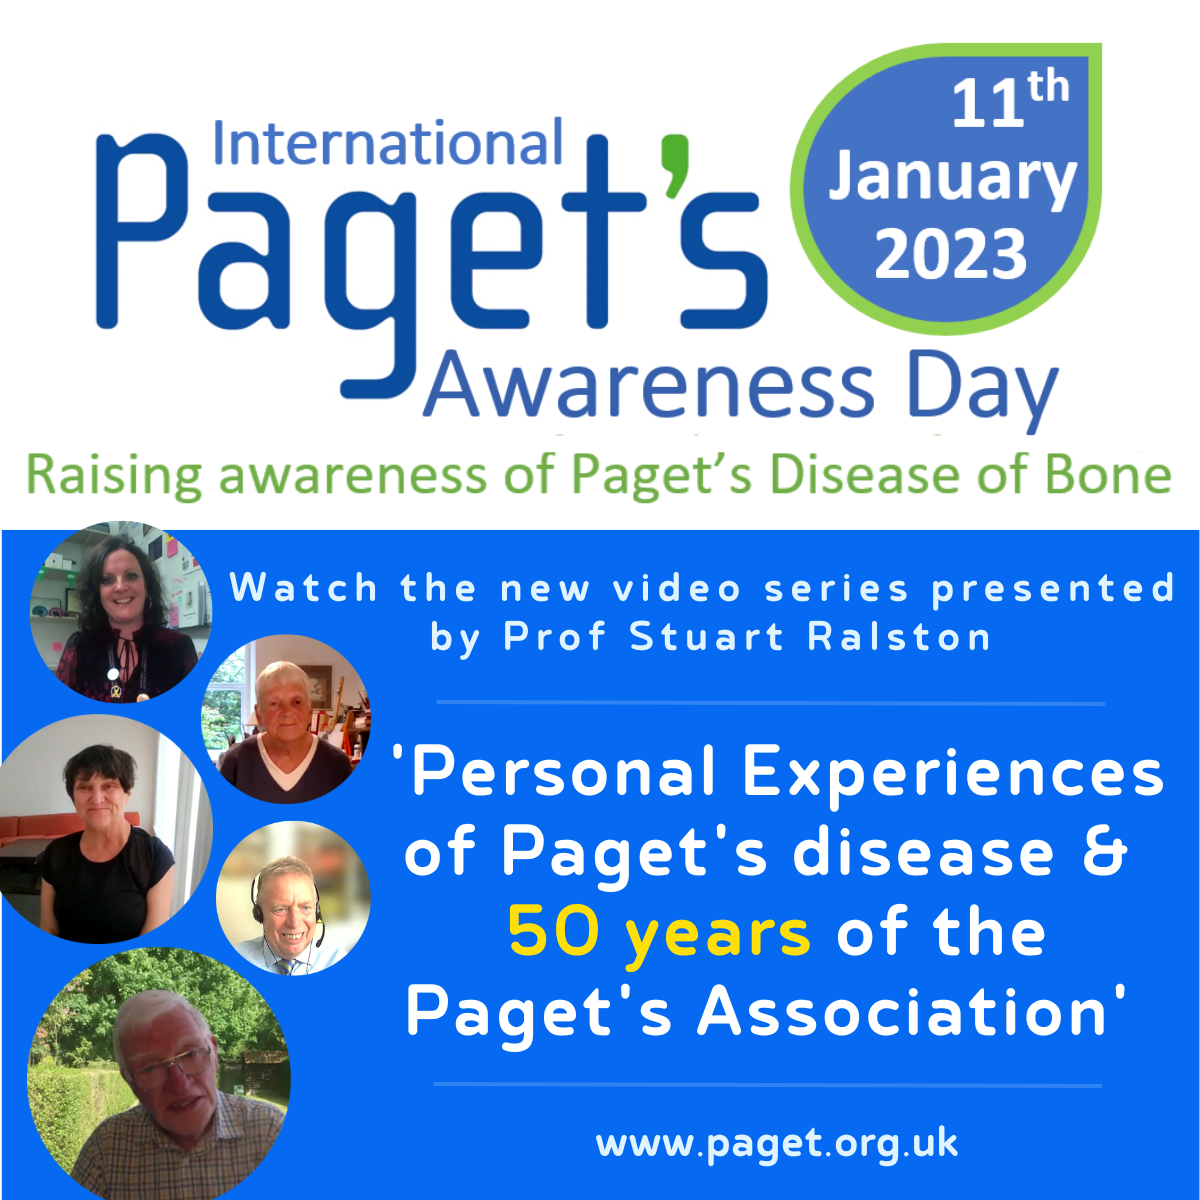 International Pagets Awareness Day 2023